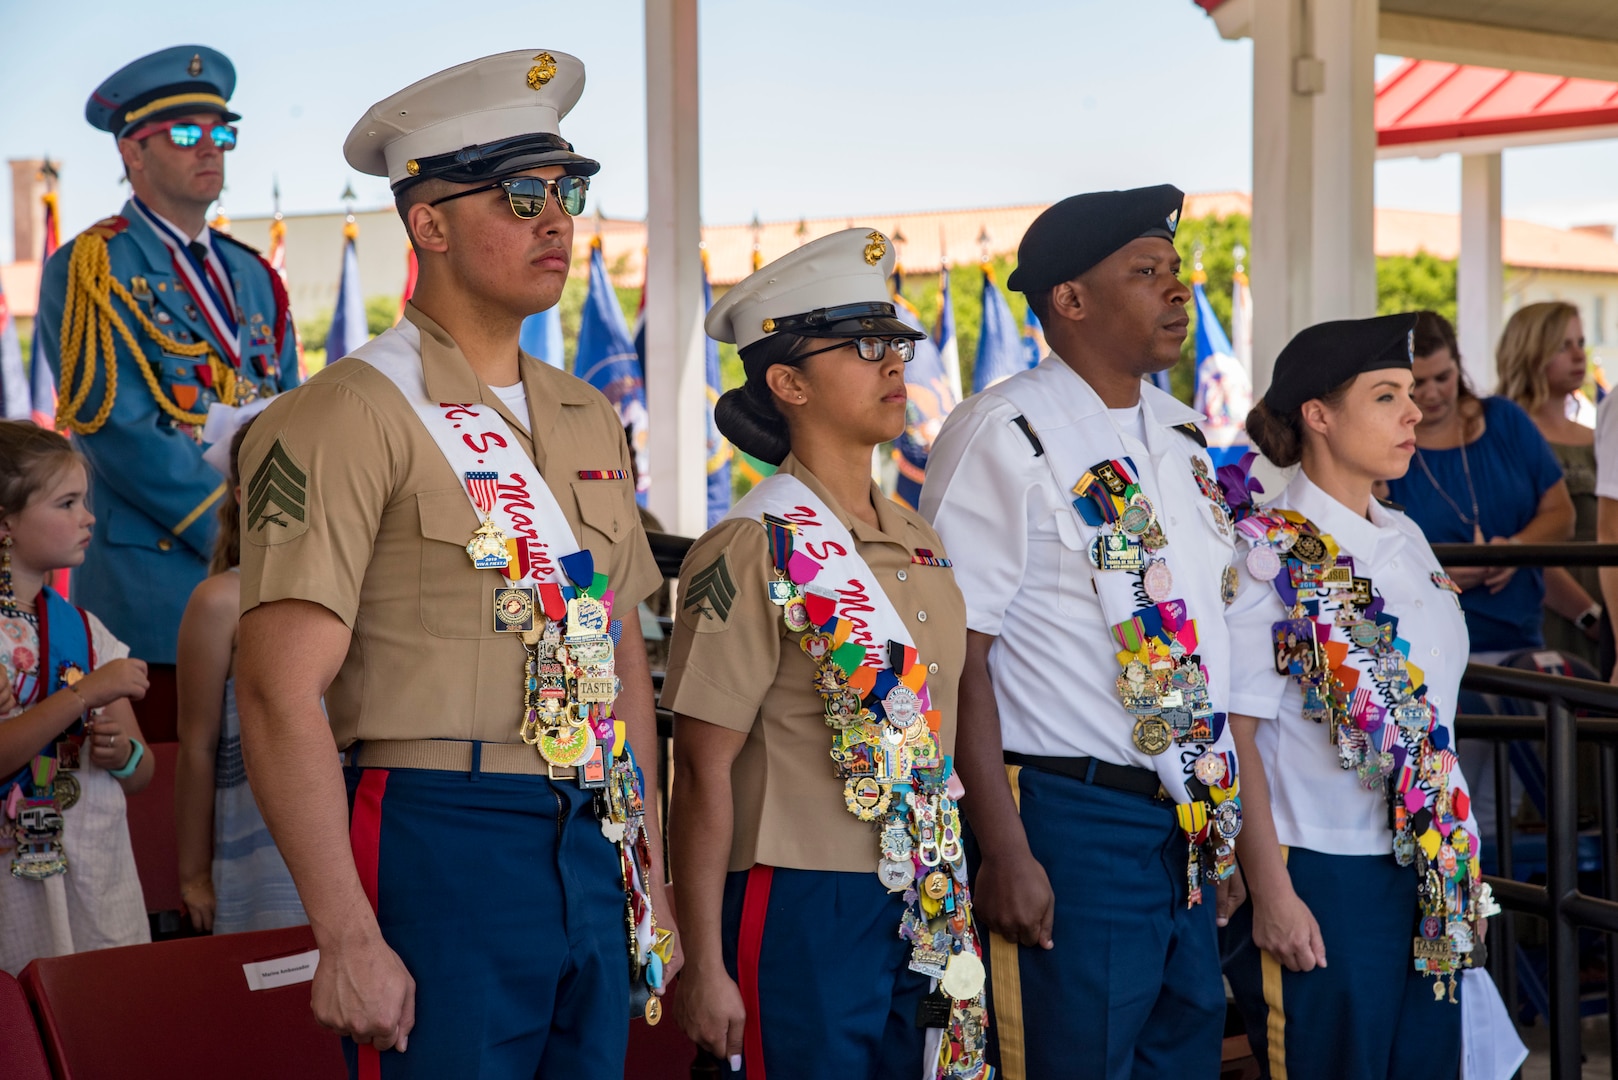 A joint service color guard presents the colors April 20, 2019, at Joint Base San Antonio-Fort Sam Houston, Texas during the Fiesta and Fireworks Extravaganza. Fiesta honors the long-standing partnership between the U.S. military and San Antonio in annual Fiesta events, which commemorate TExas’ independence after the Battle of San Jacinto and the Alamo.  (U.S. Air Force photo by Senior Airman Stormy Archer)